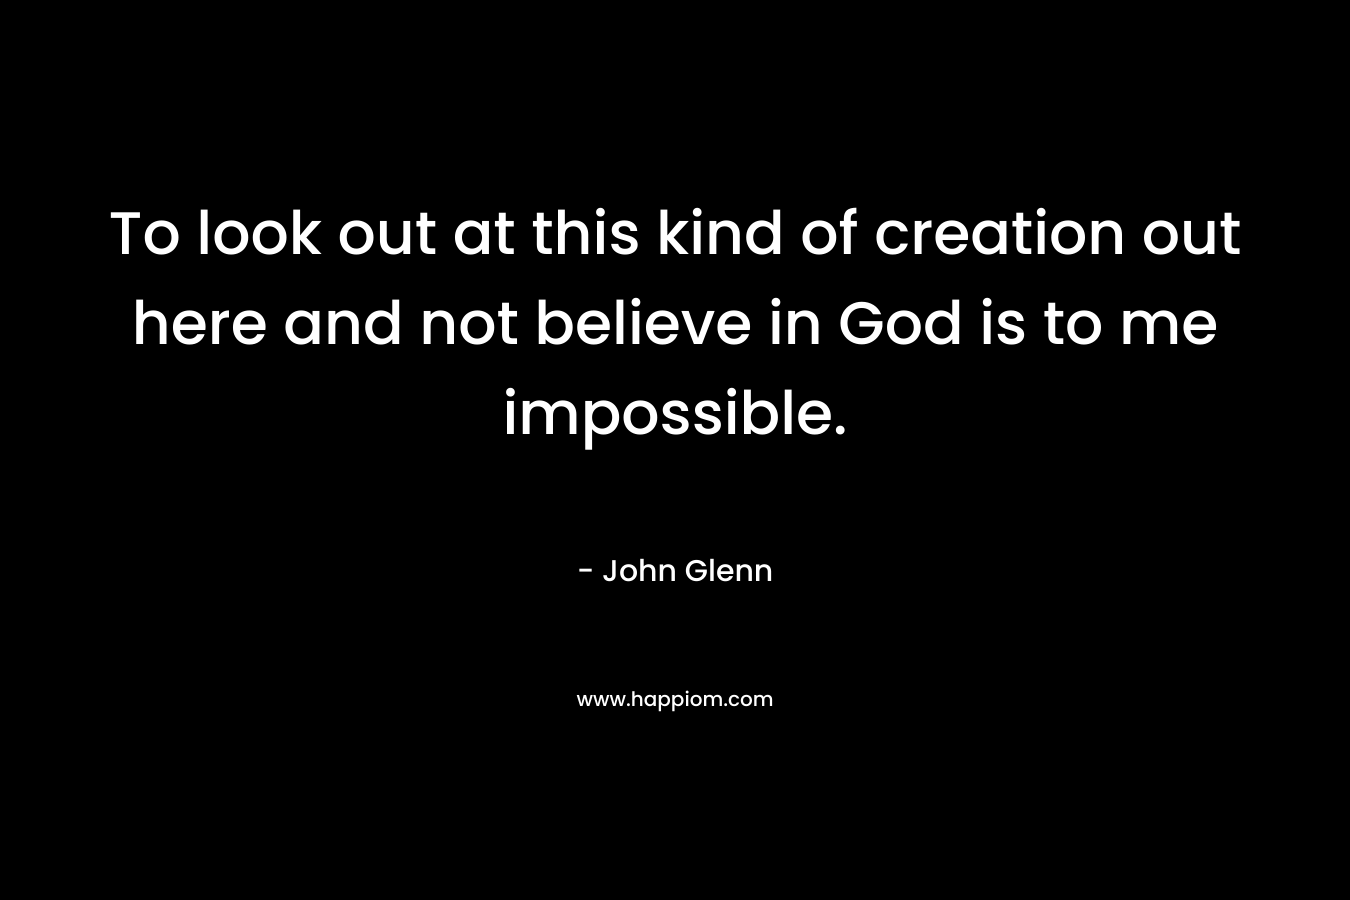 To look out at this kind of creation out here and not believe in God is to me impossible. – John Glenn